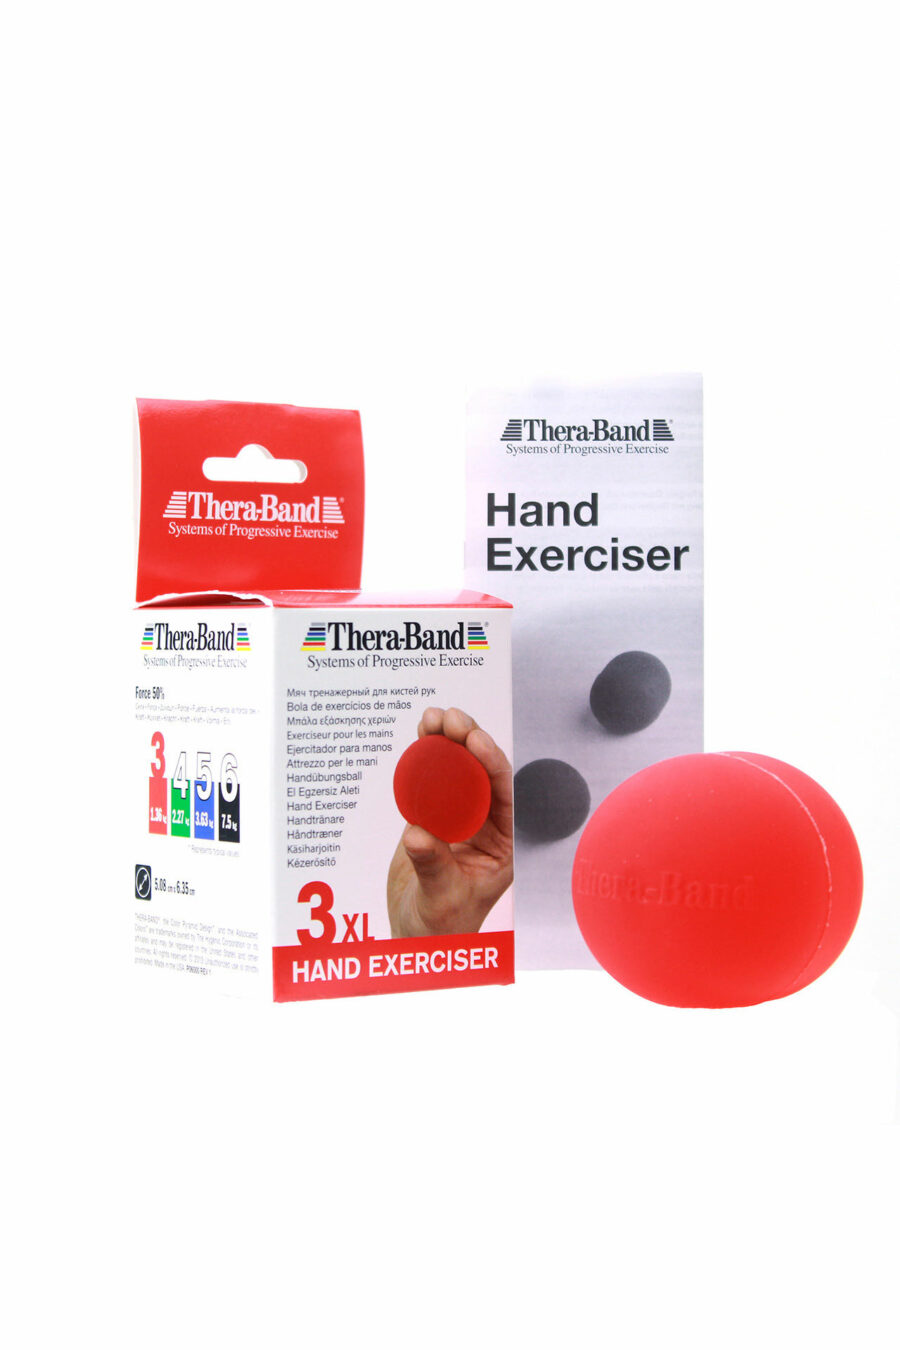 hand excersiser thera band red xl fengbao kung fu finger trainer shop wien 1080